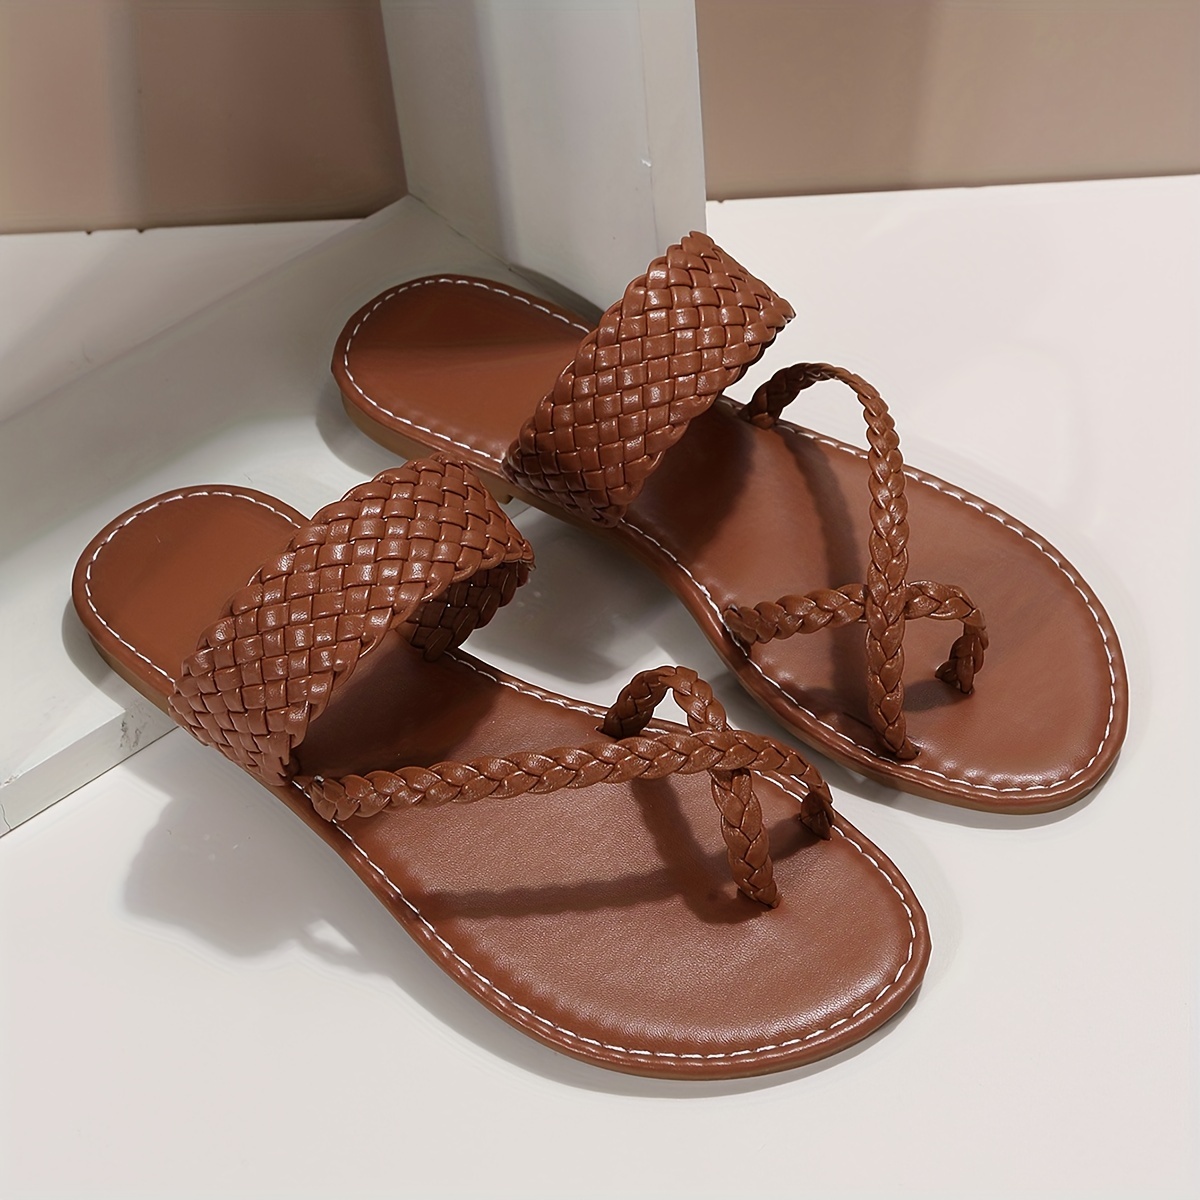 Women Flat Sandals Woven Leather Sandals Nude Size 7.5 